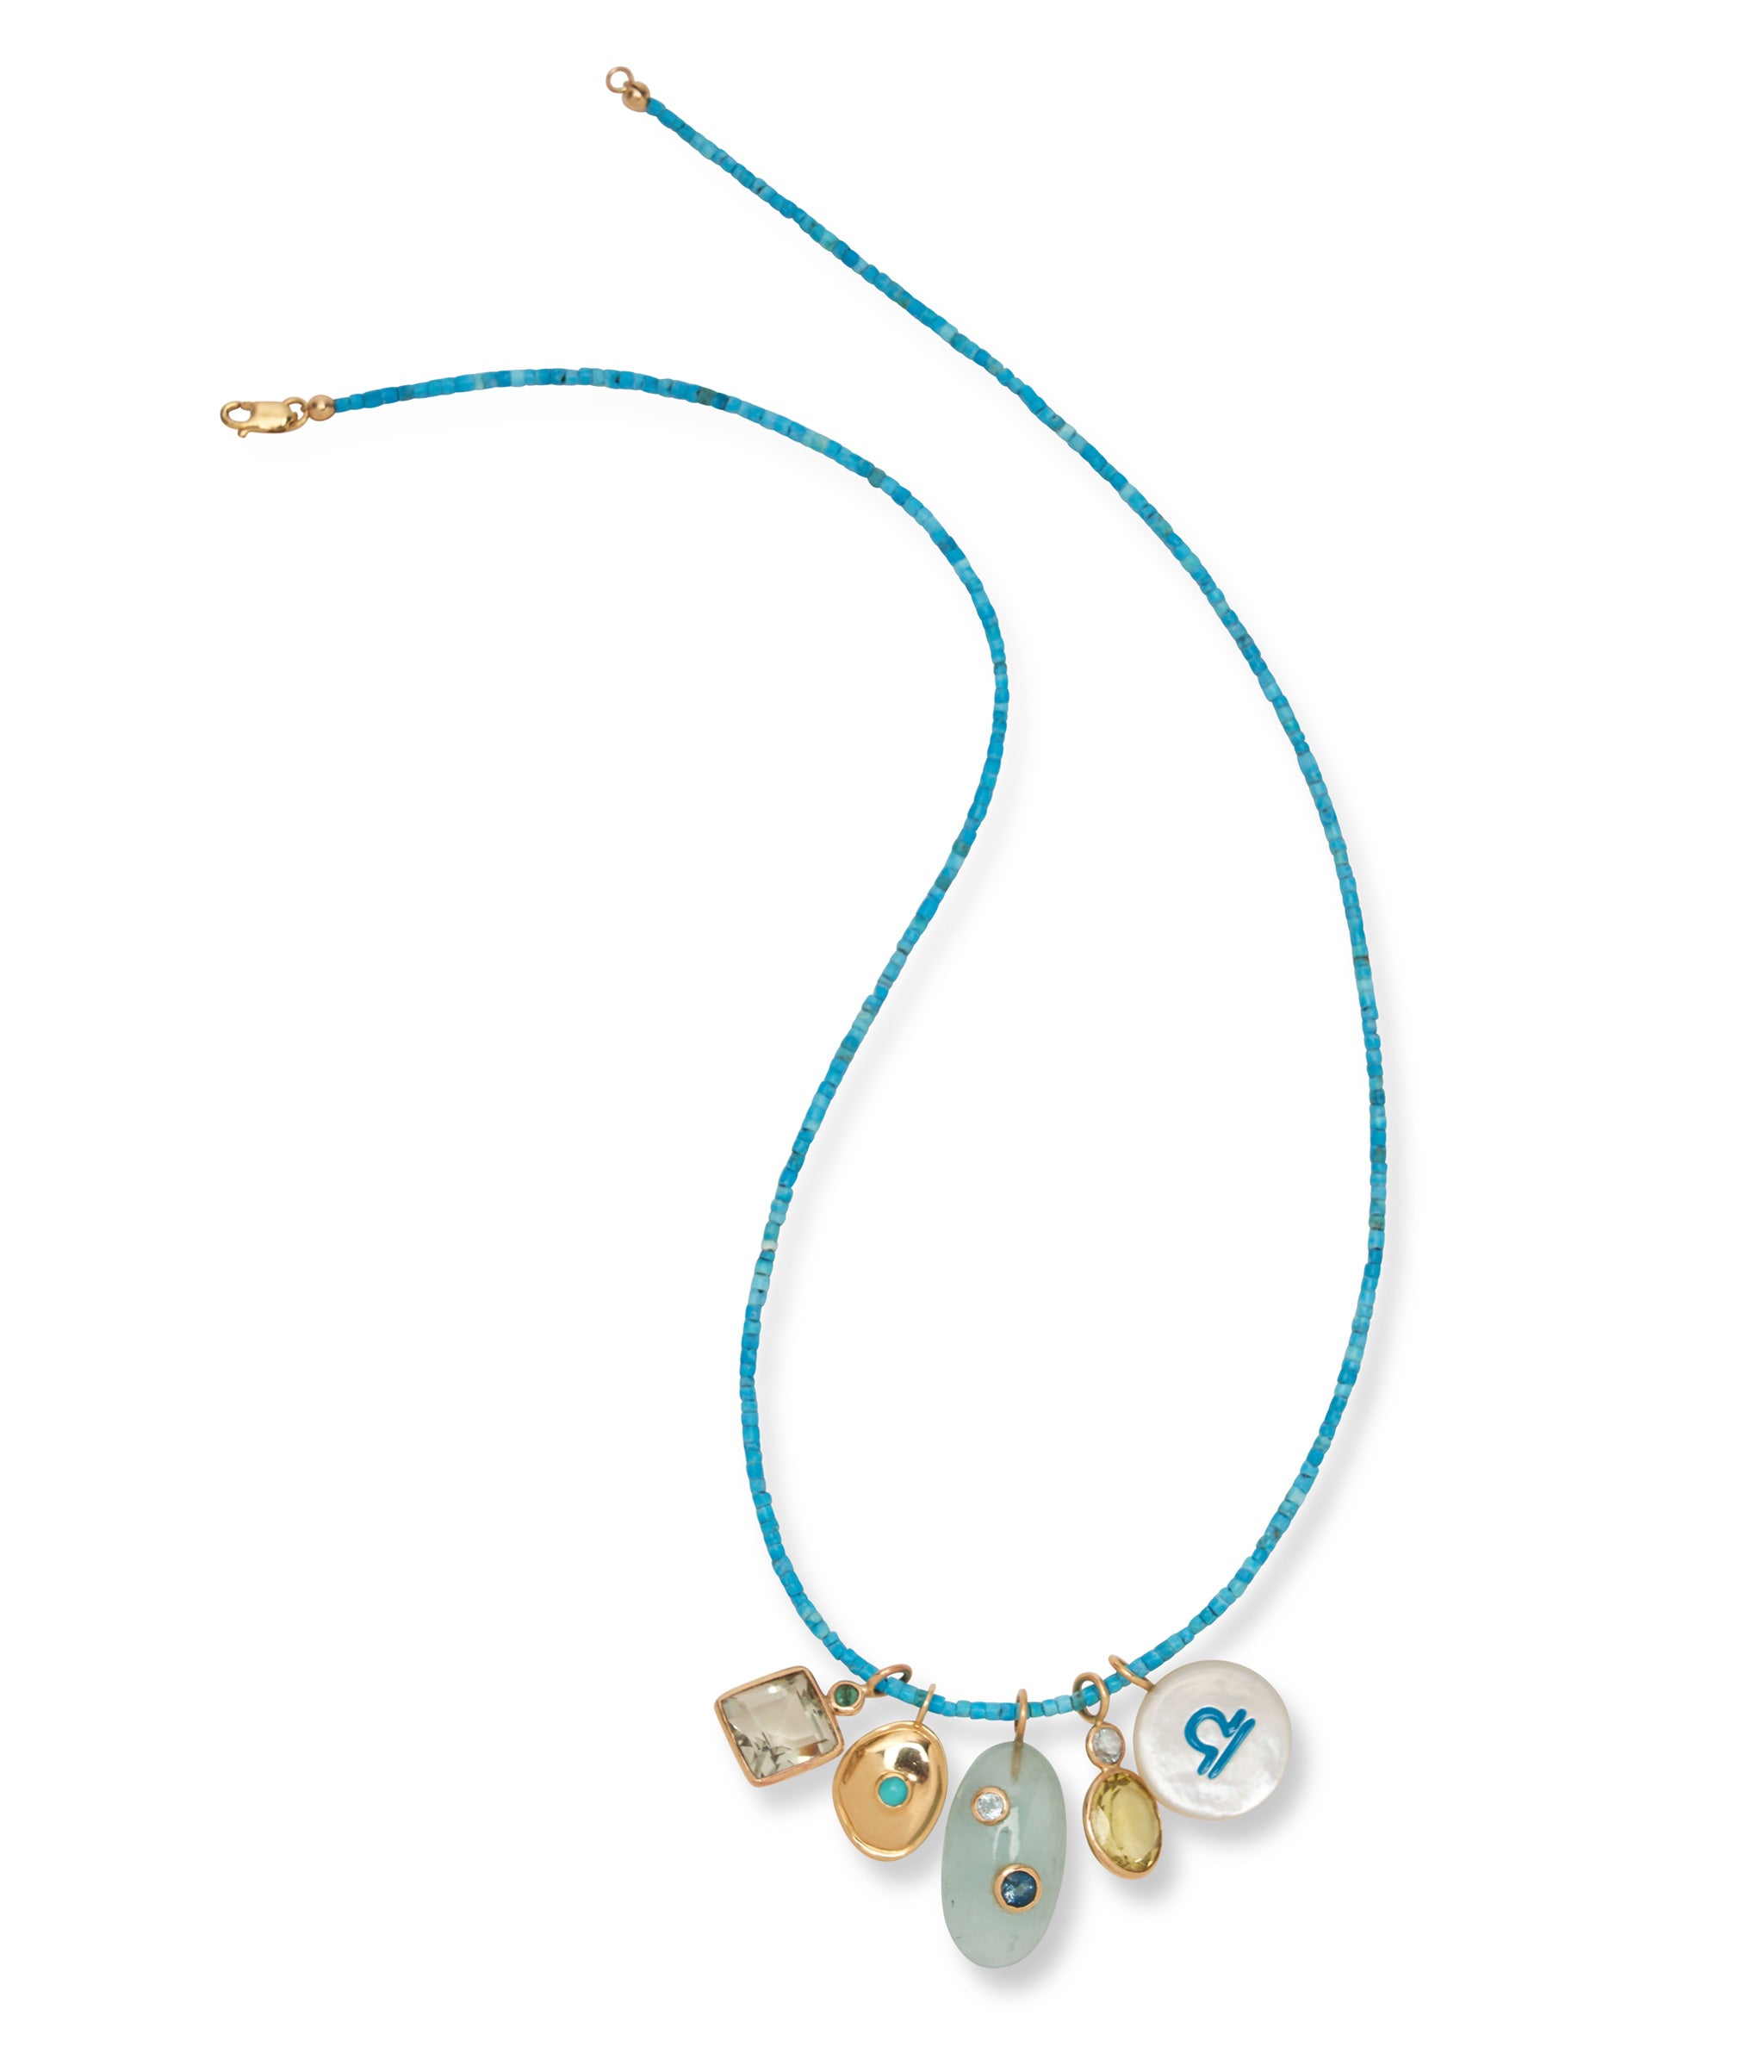 Tiny Beaded 14k Gold and Turquoise Necklace with assorted semiprecious charms.